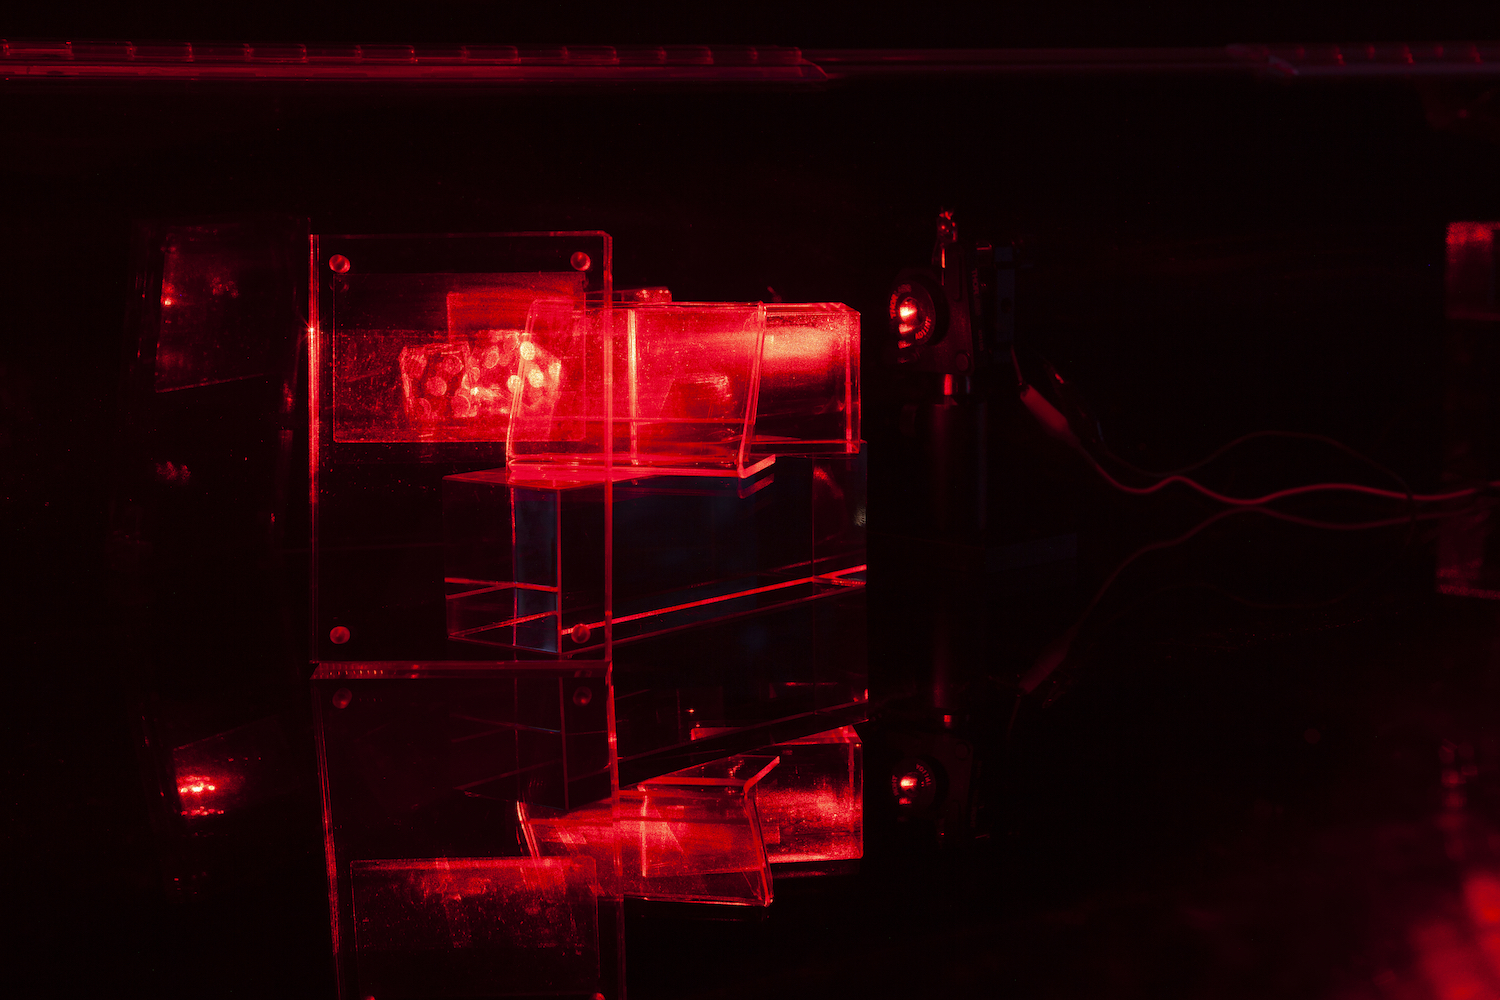 Constantina Zavitsanos, *Boxed Bet*, 2019. Transmission holograms, acrylic mounts, 5mW red laser. Detail view

[image description: Against a darkened black background, an arrangement of glowing red holograms on dimensional clear acrylic mounts. Holographic images of dice mid-roll are lit by a red laser in a scientific metal mount. The light reflects against the black plexiglass surface on which the holograms sit.]